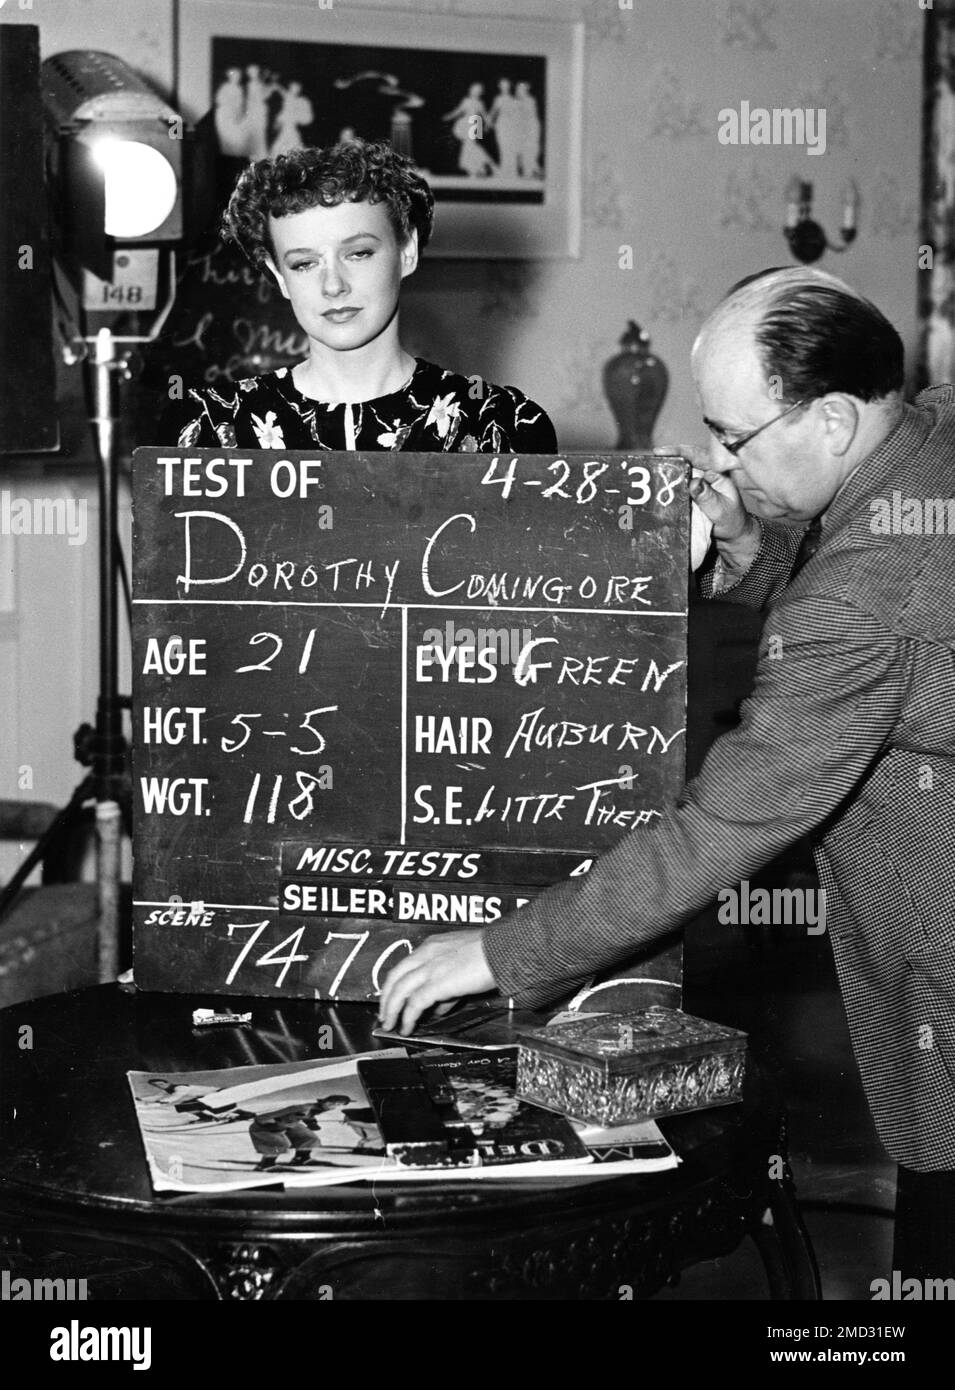 DOROTHY COMINGORE Screen Test at Warner Brothers Burbank Studios on 28th April 1938 publicity for Warner Bros. Stock Photo